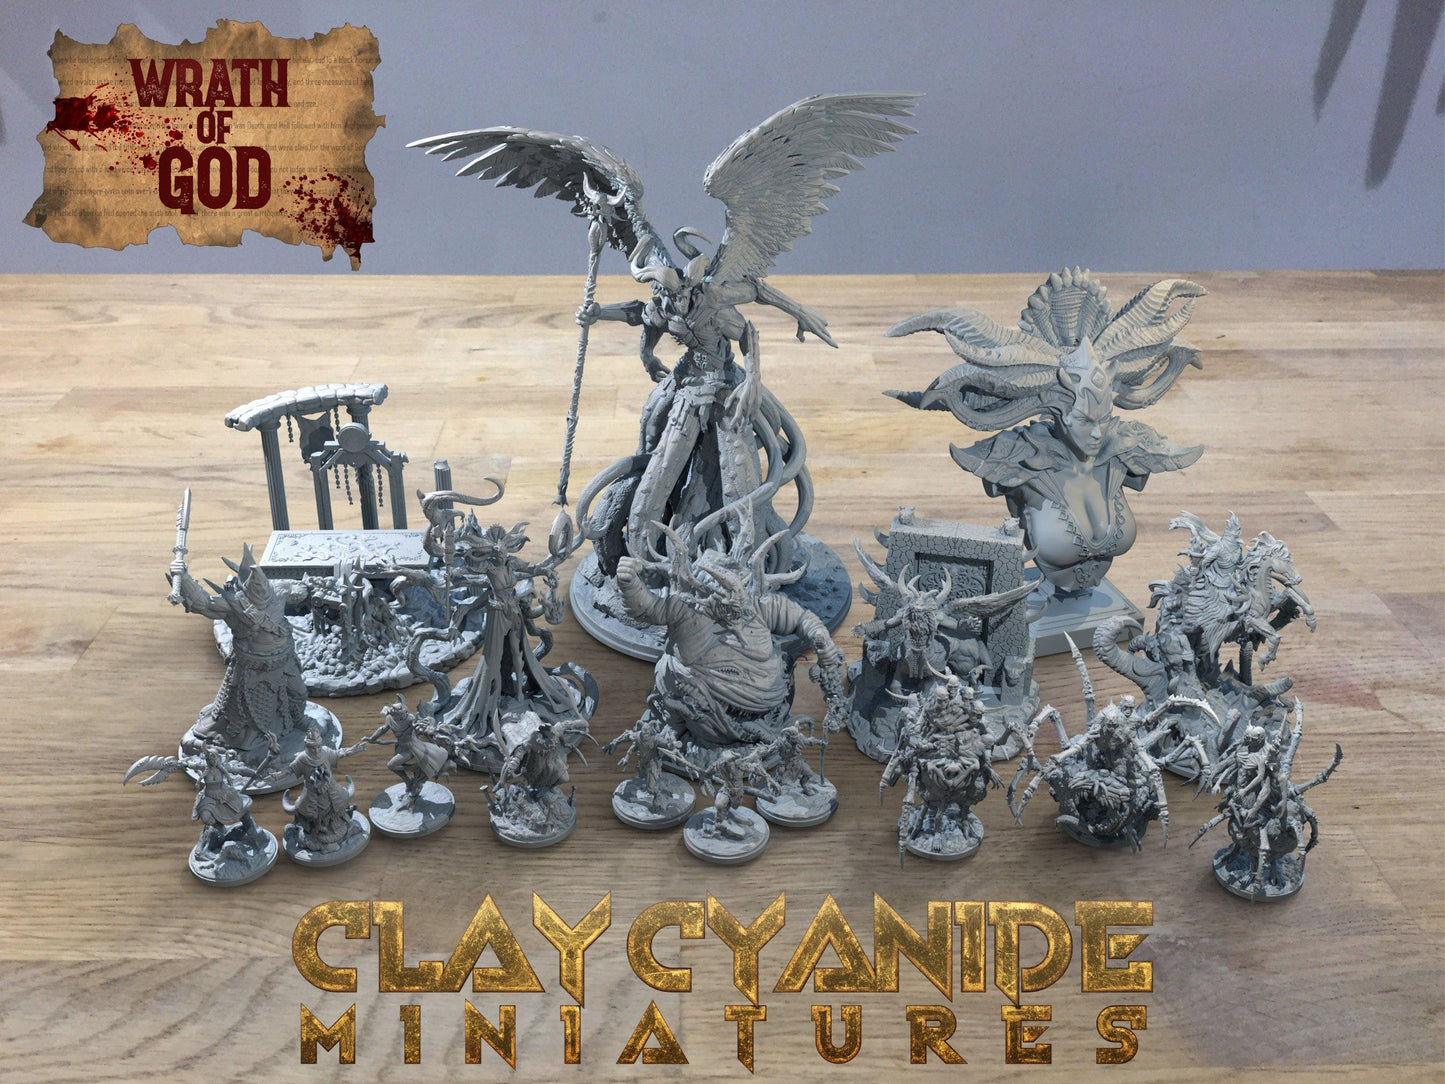 Chalchiutotolin | Clay Cyanide | Wrath of God | 32mm Scale | DnD Miniature | Dungeons and Dragons,DnD monster - Plague Miniatures shop for DnD Miniatures